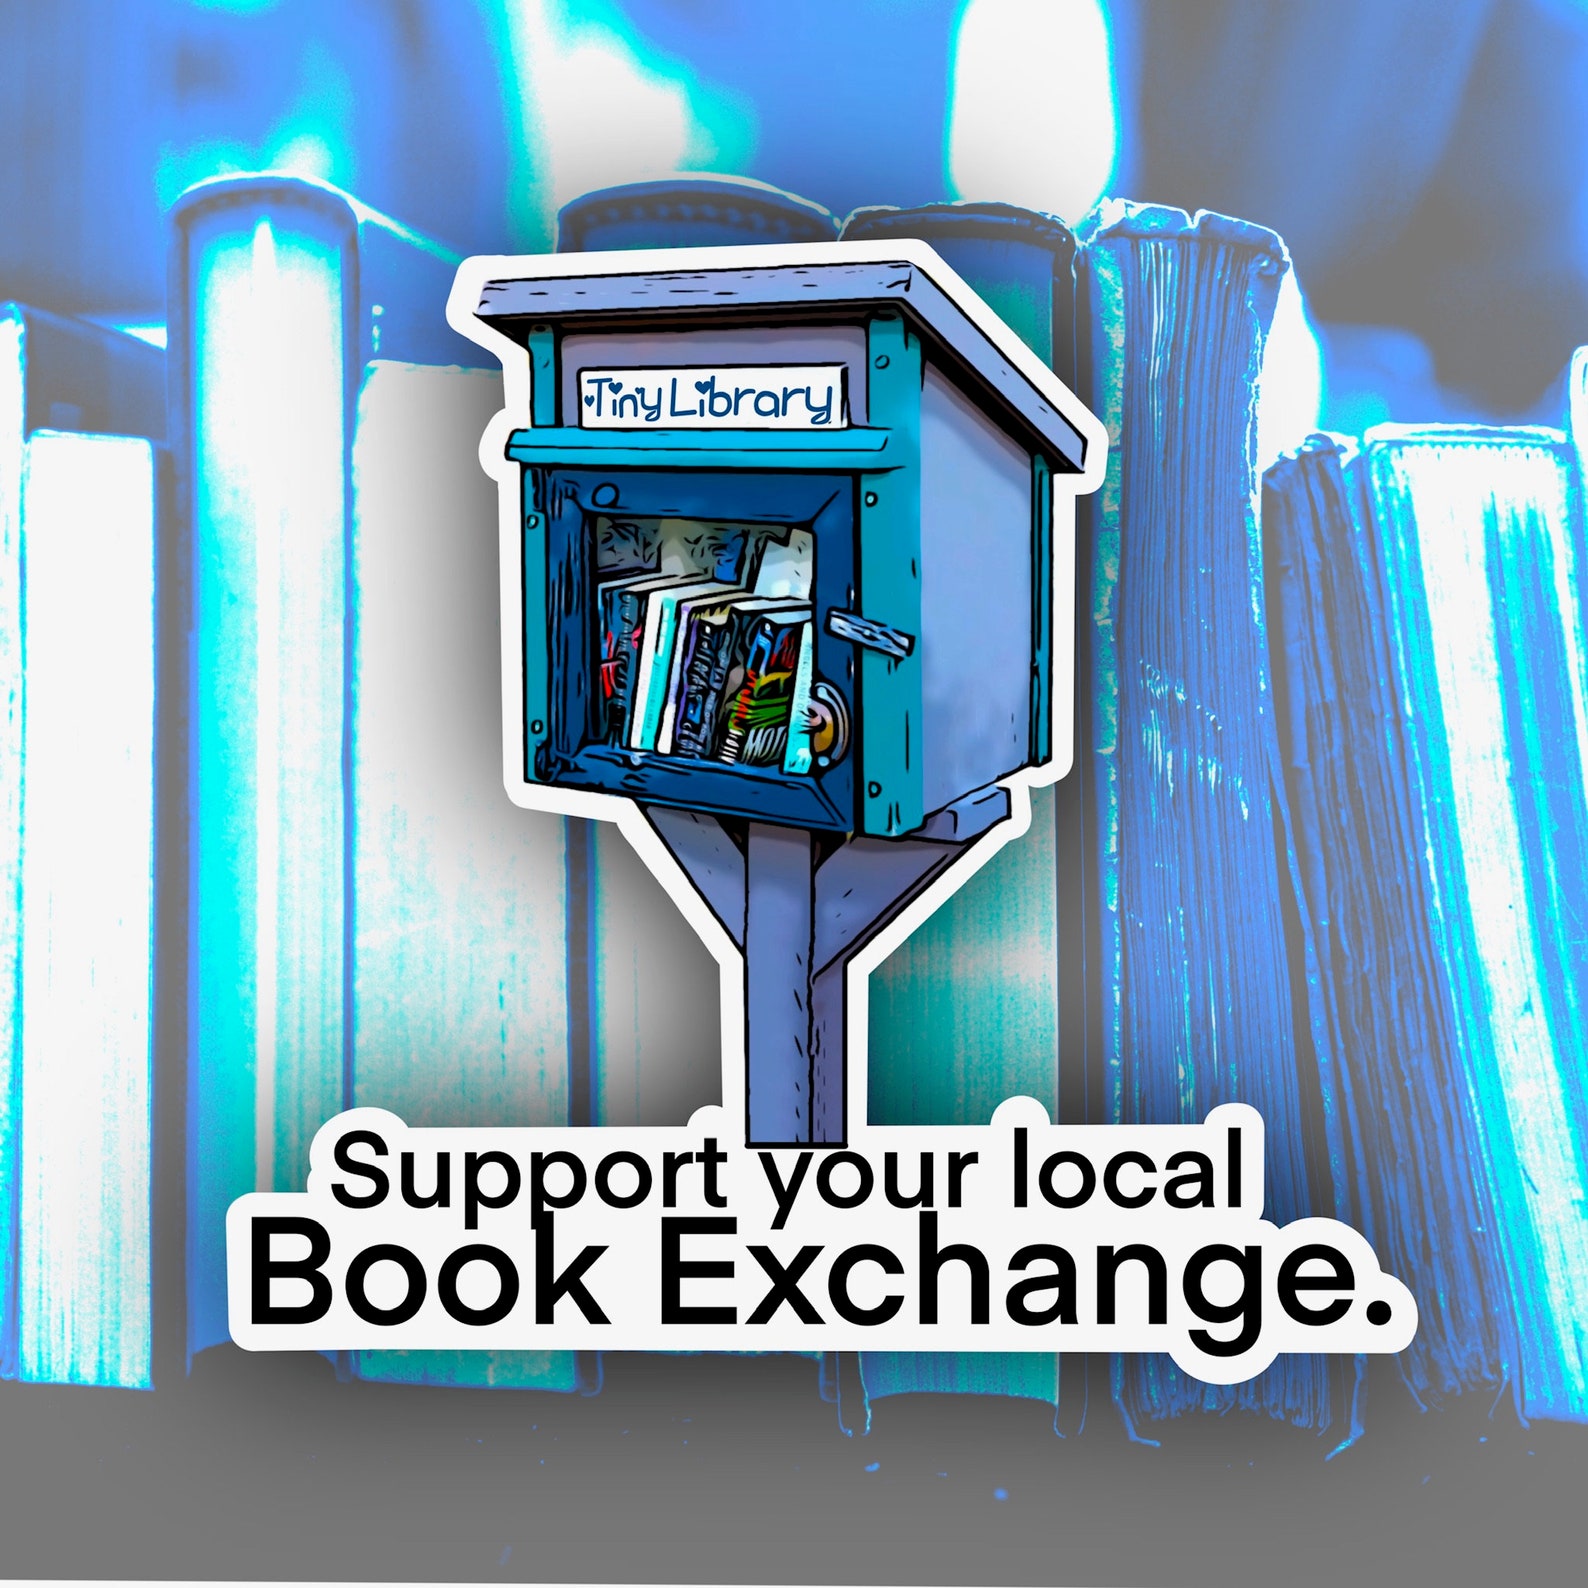 Small sticker of a blue LFL that says "Support your local book exchange"